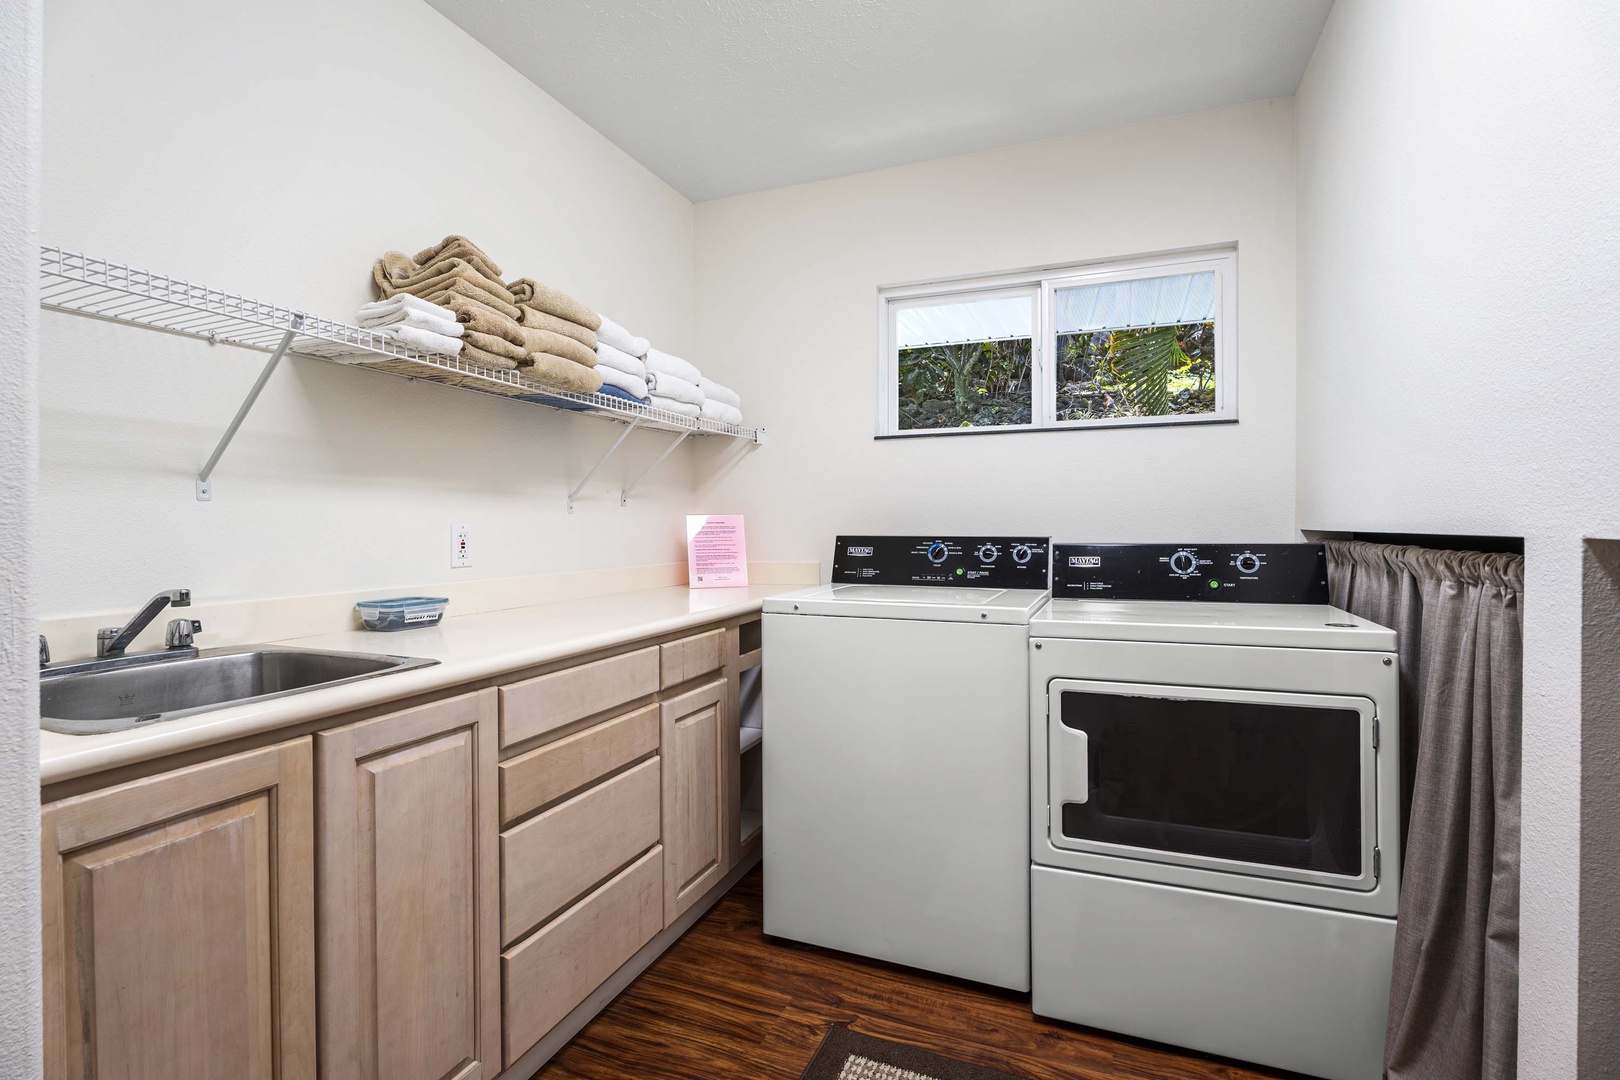 Kailua-Kona Vacation Rentals, Honu Hale - Laundry room equipped with commercial grade washer/dryer